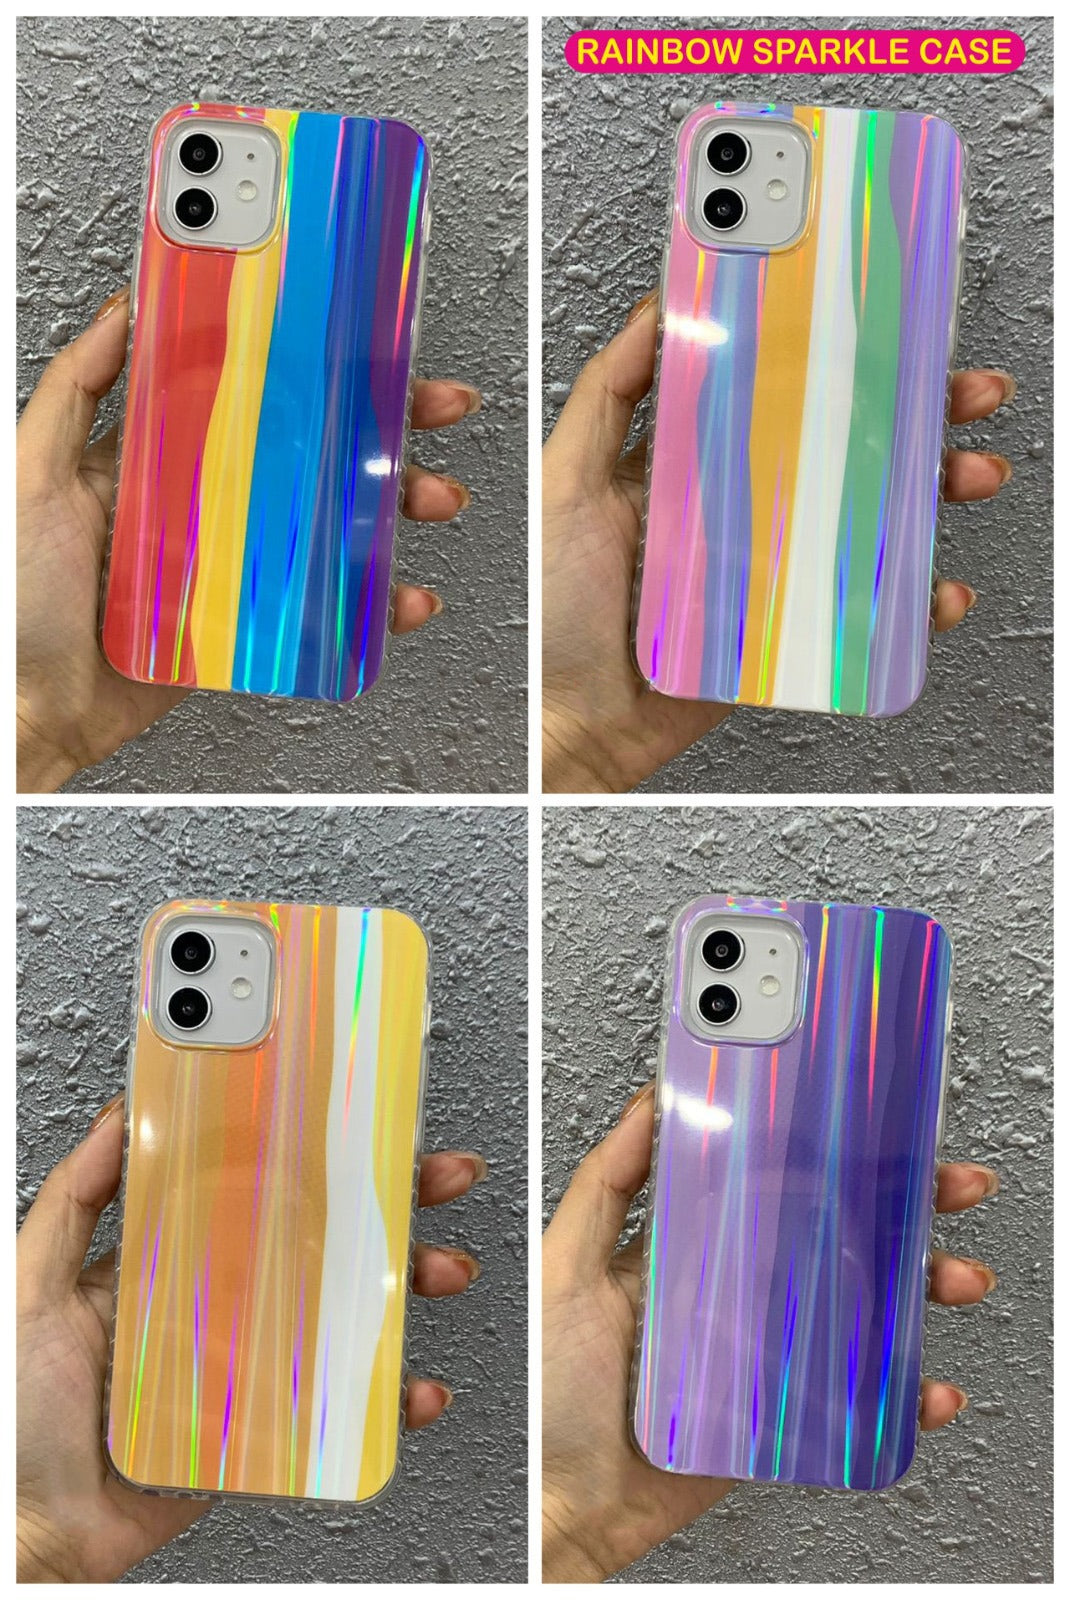 21301 Oppo's Rainbow Shine Hard Back Cover | Hard Rainbow Pattern Case | Glossy Rainbow finish Cover | For Girls Boys Women Kids |  With Hard Edges & Full Camera Protection